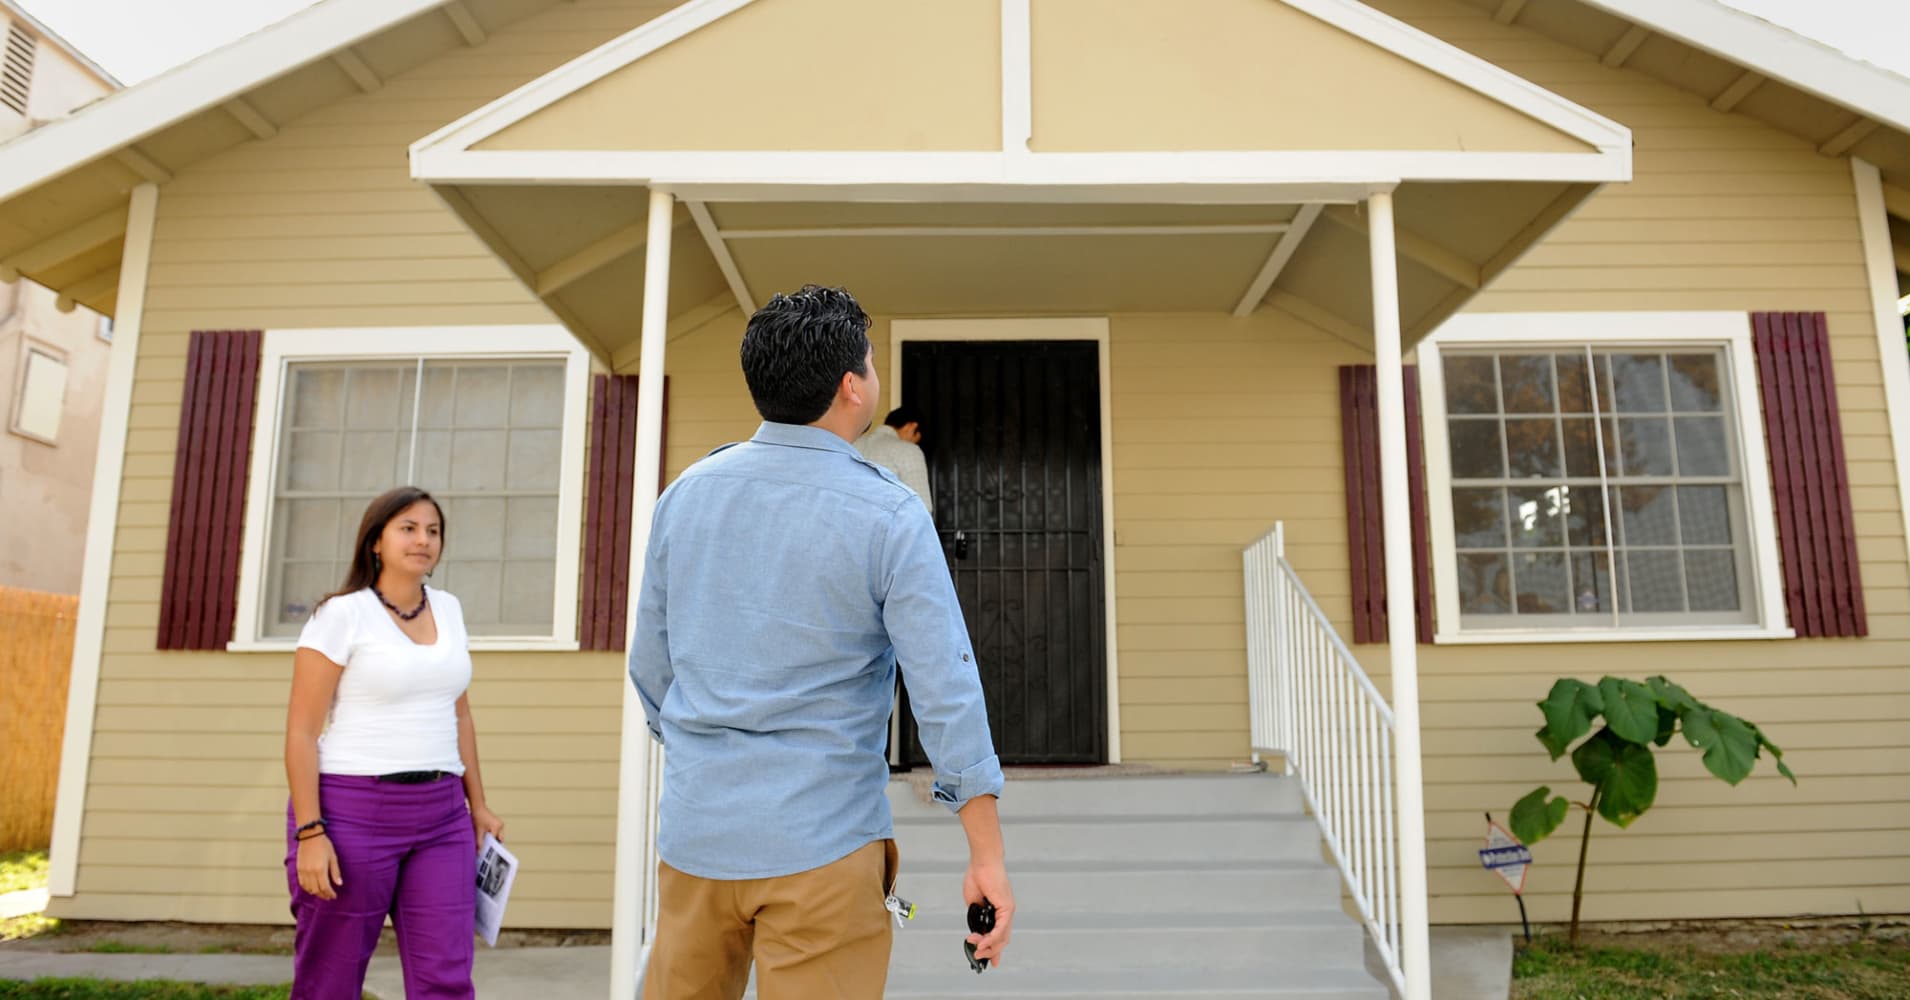 Millennials want to buy houses but can't get mortgages